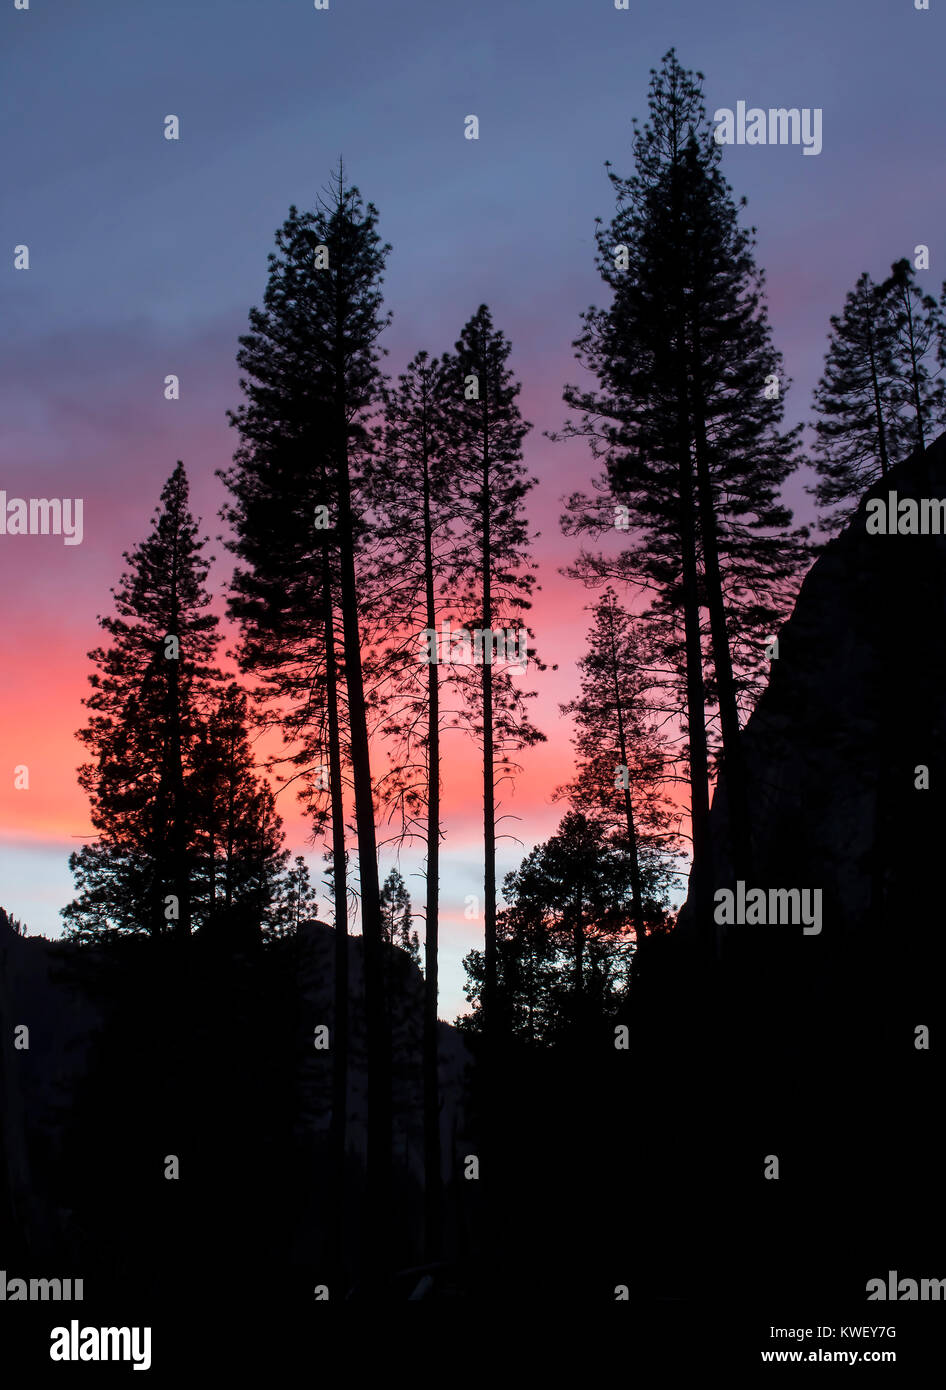 Group of Pine Trees in Silhouette with Pink Sunset Stock Photo